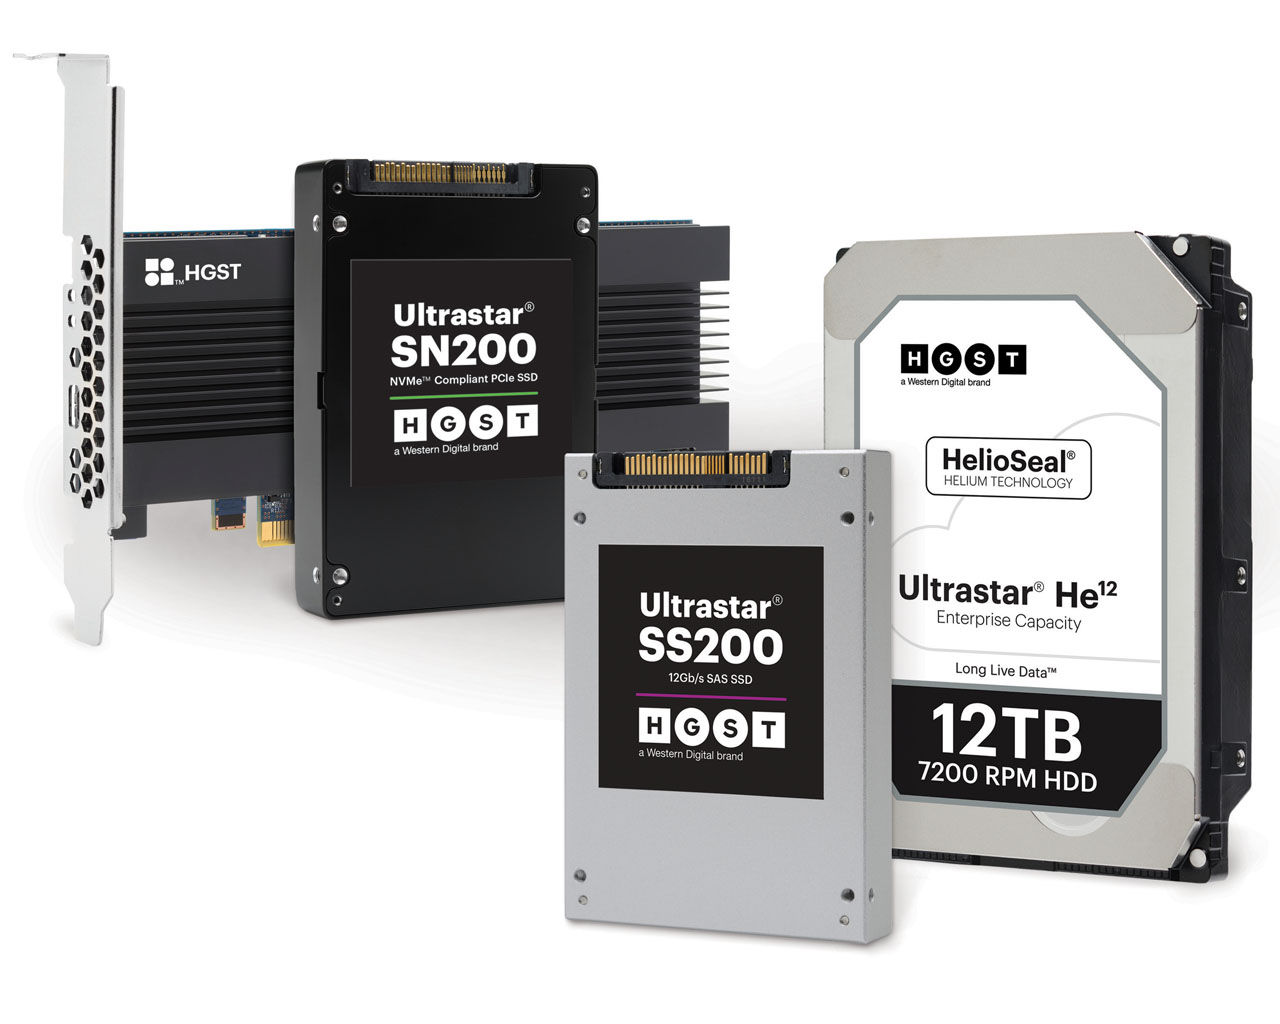 romanforfatter Fordeling tom WD Offers 12TB HDD and 8TB SSDs Today, Promises QLC SSDs In The Future |  Tom's Hardware